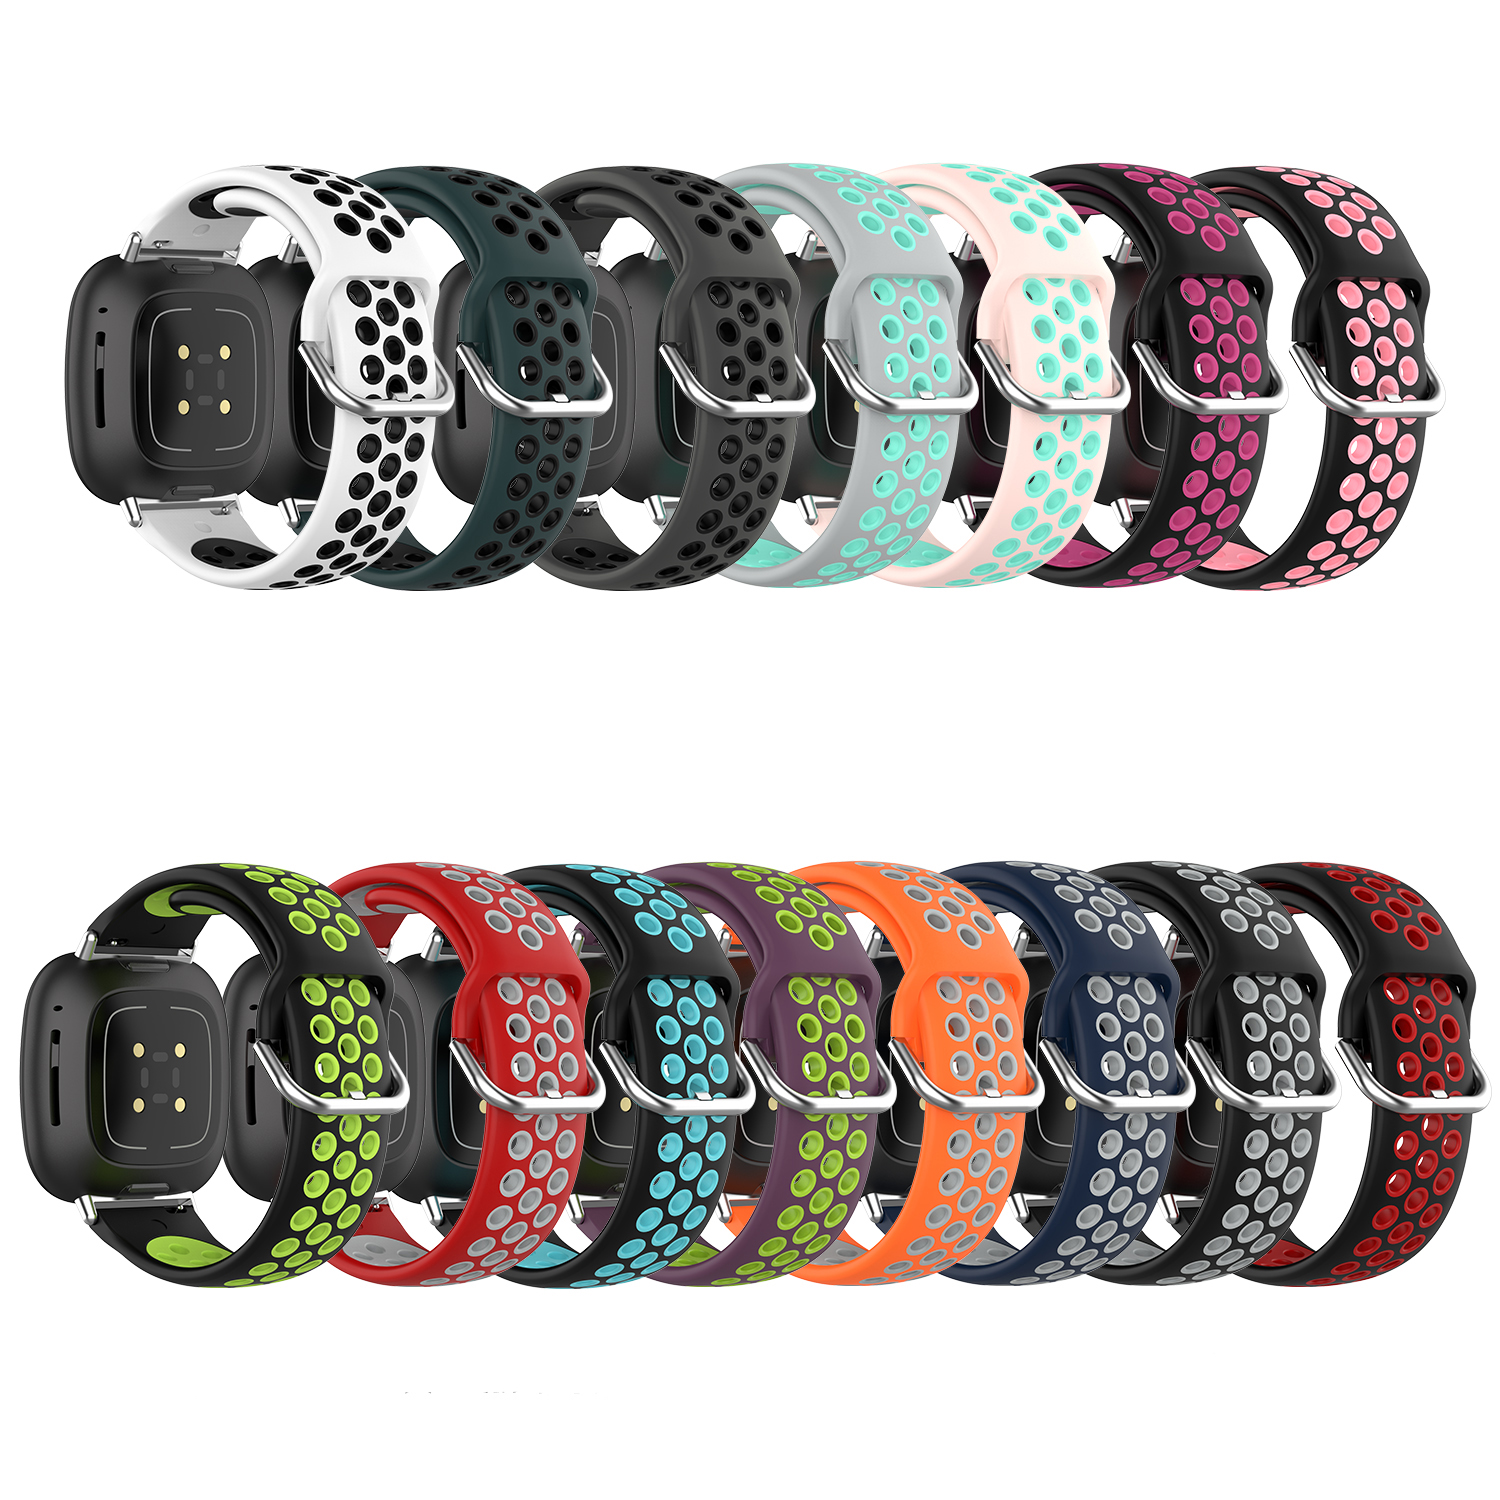 15 Colors Wrist Band Watchband Strap For Fitbit Versa 3/Fitbit Sense ...